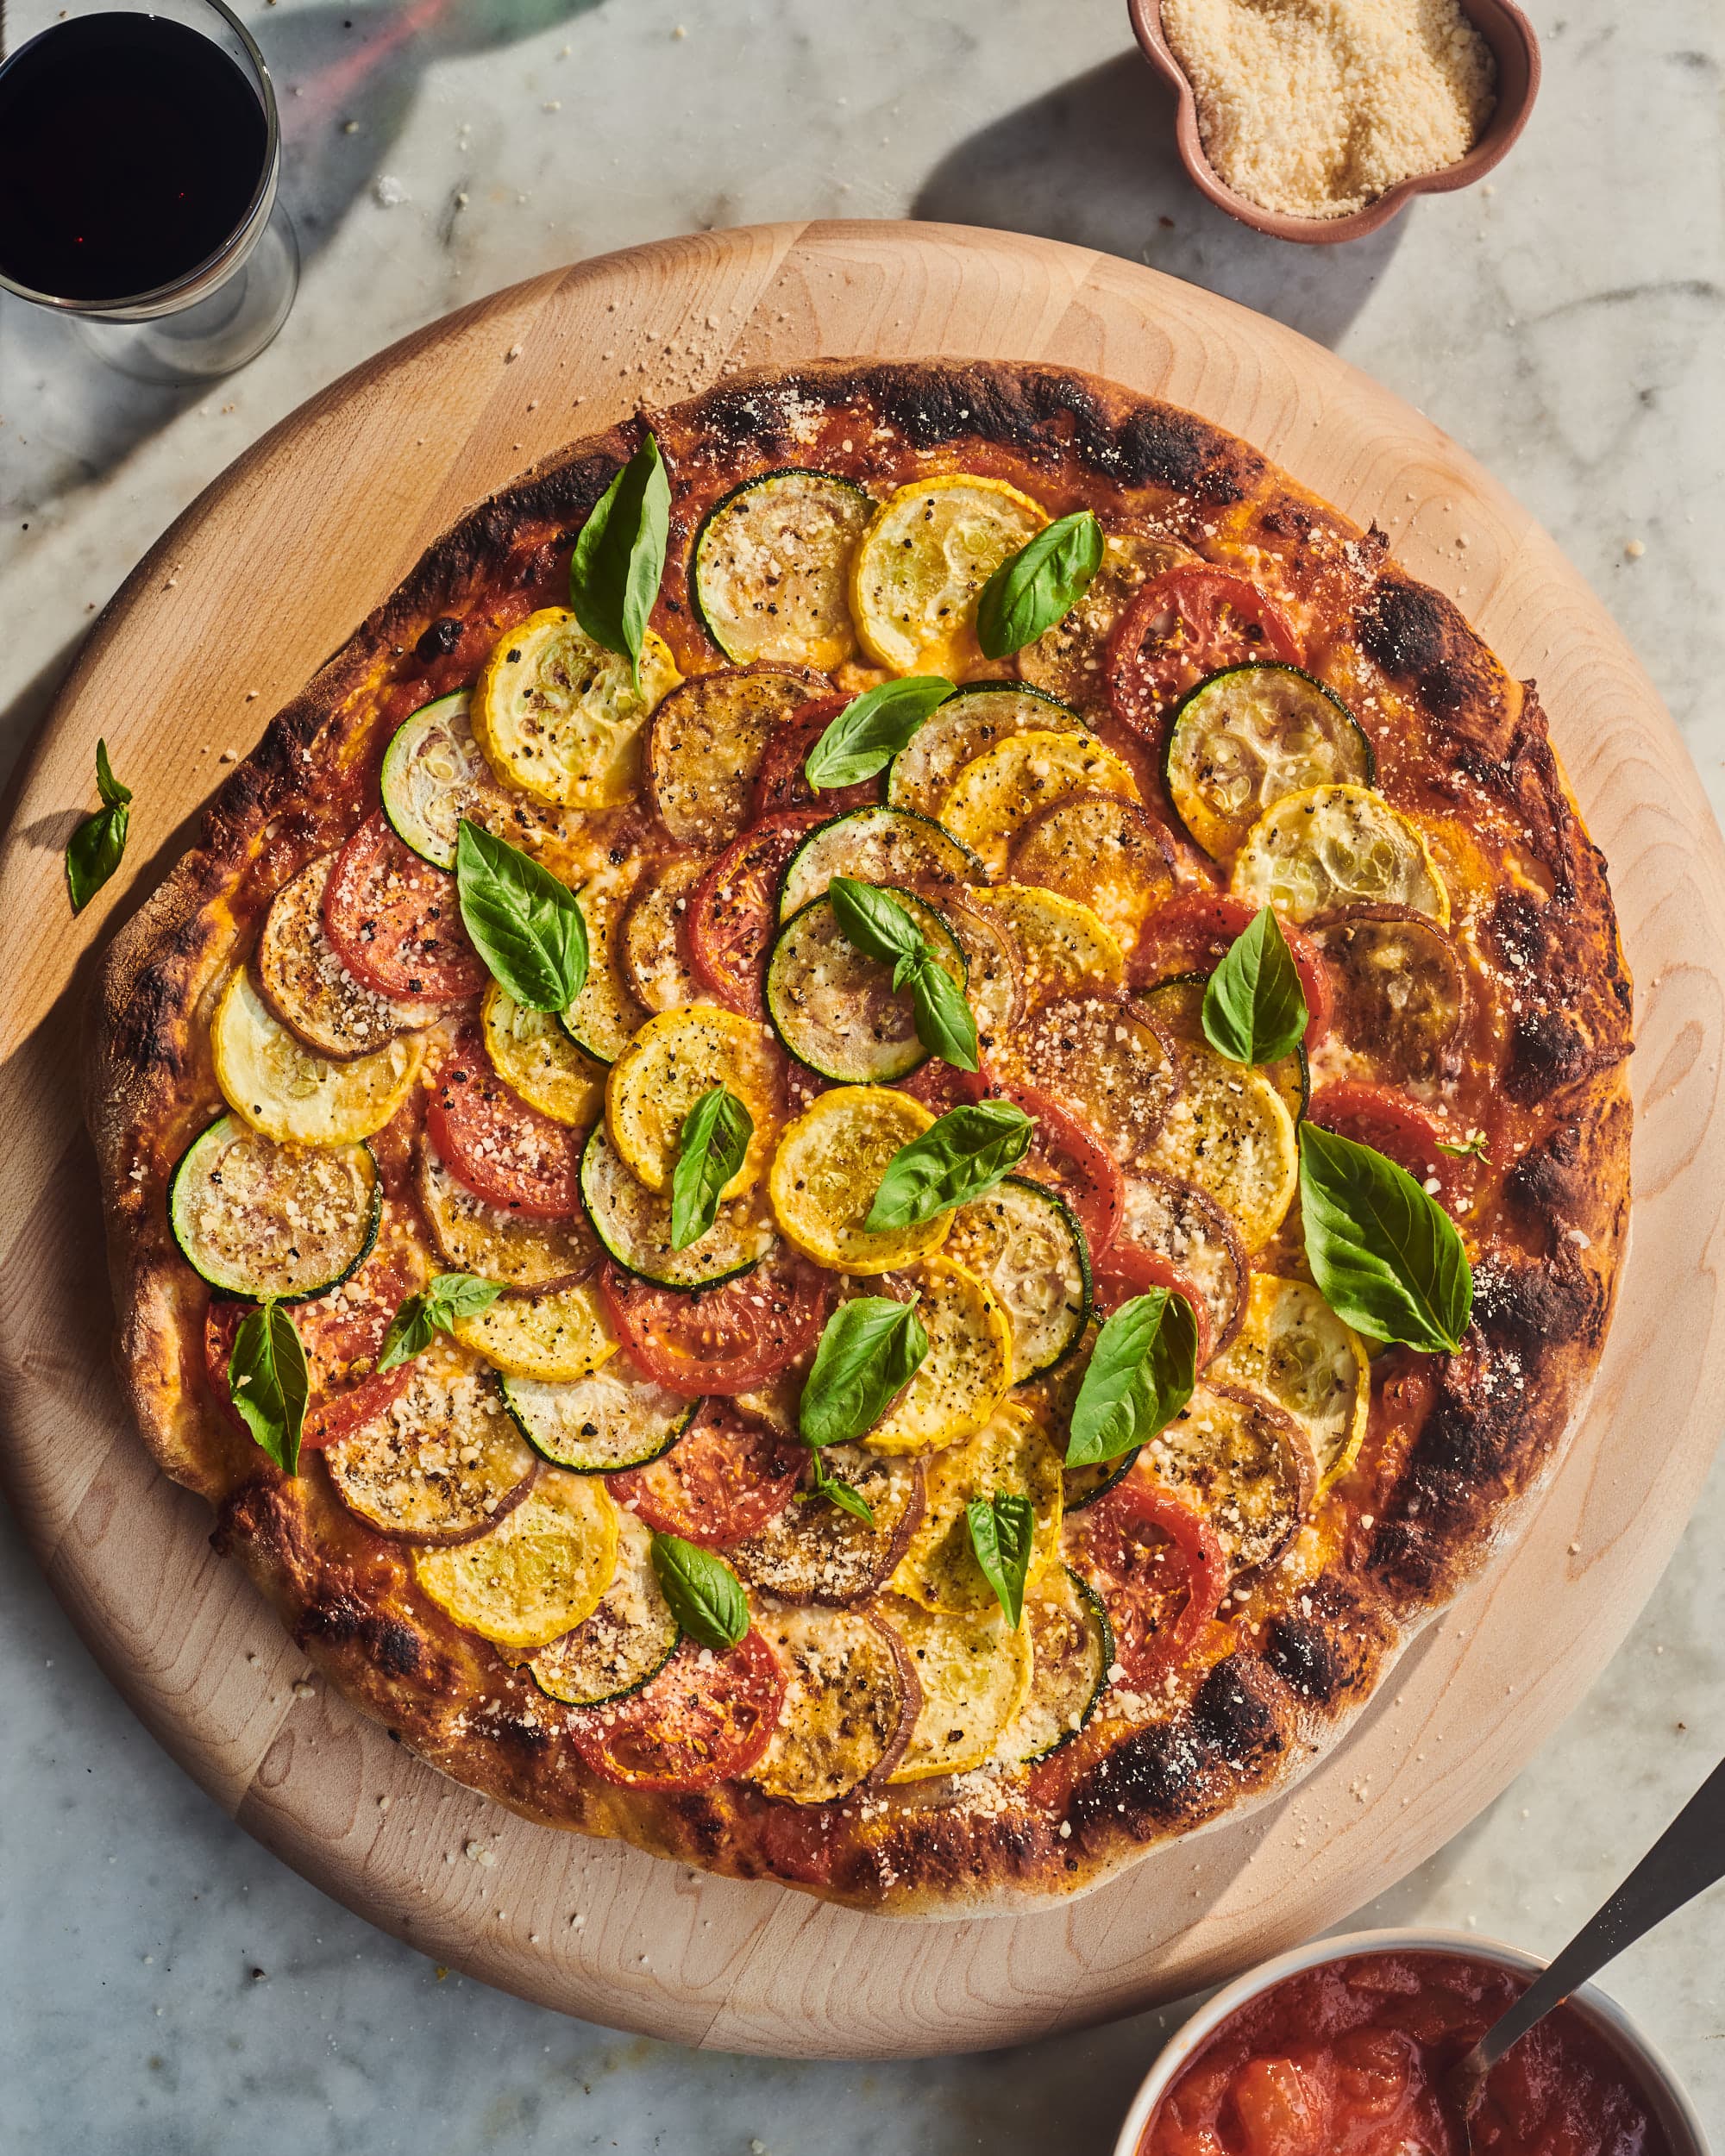 3 Pizza Tools You Should Add to Your Kitchen ASAP, According to a Pizza Pro